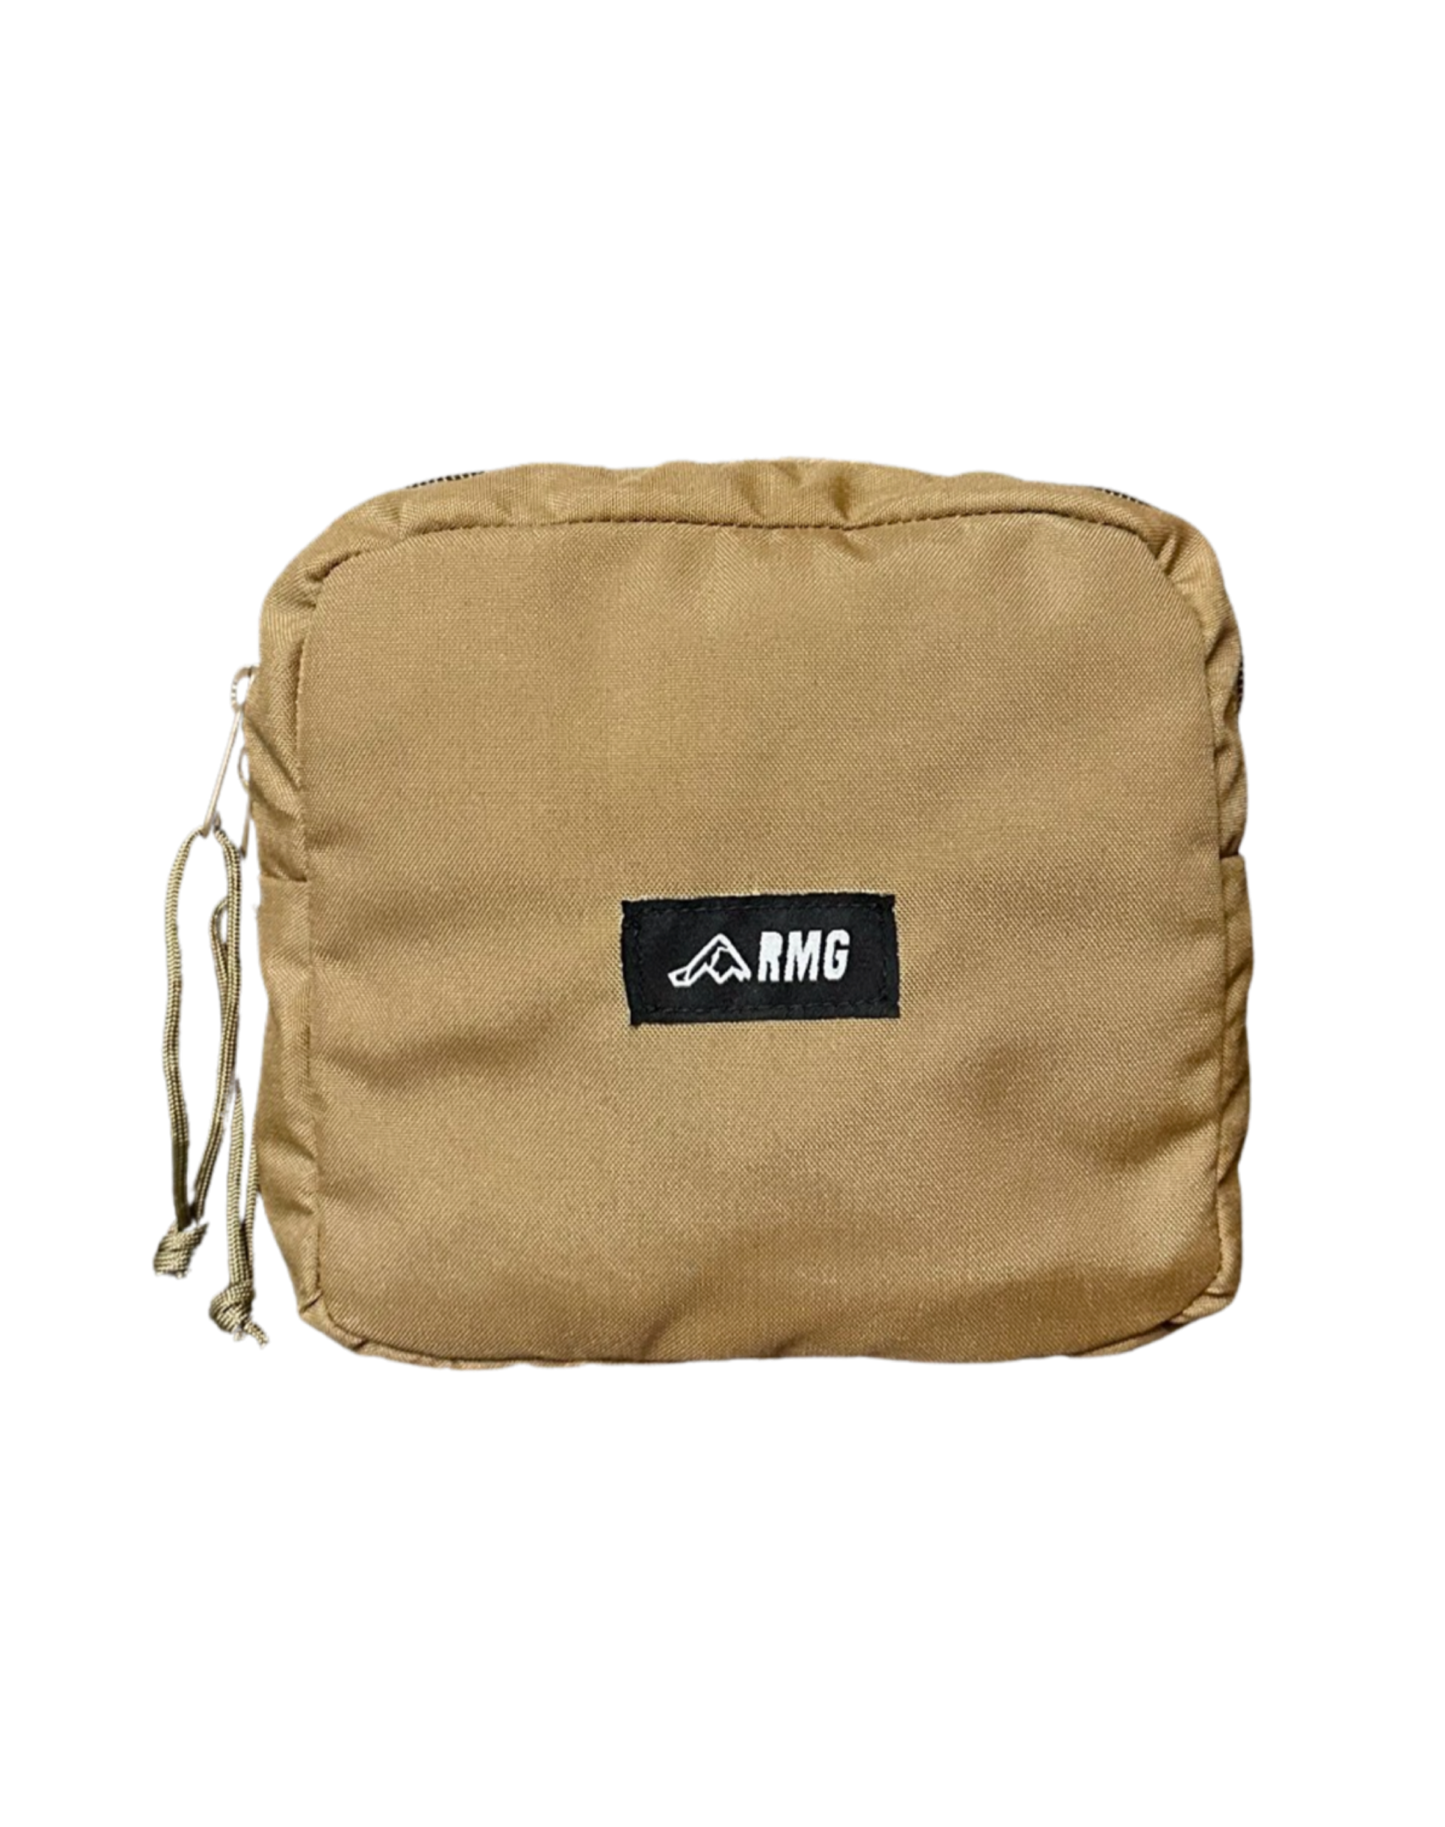 RMG Ruckmule modular MOLLE field pouch Coyote brown 